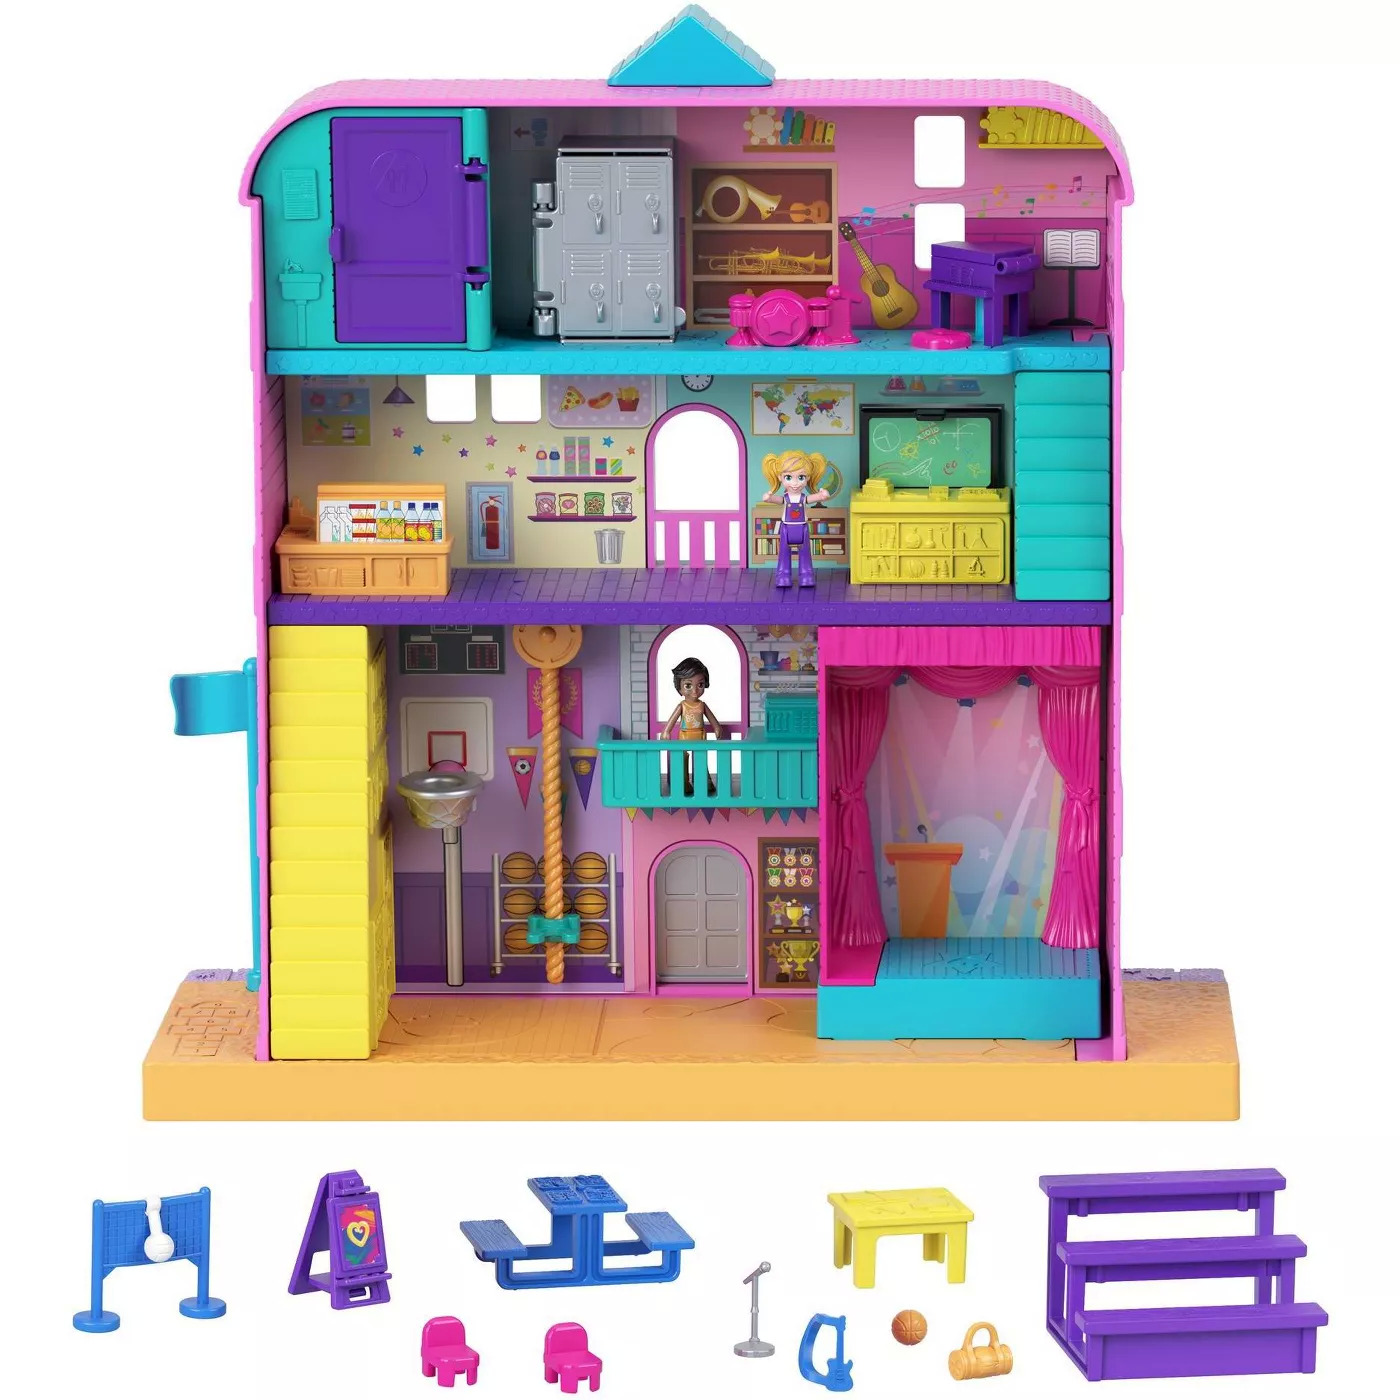 17-Pc Polly Pocket Pollyville Mighty School Playset w/ Polly & Nicolas Dolls & Accessories $11 & More + Free Store Pickup at Target or FS on $35+